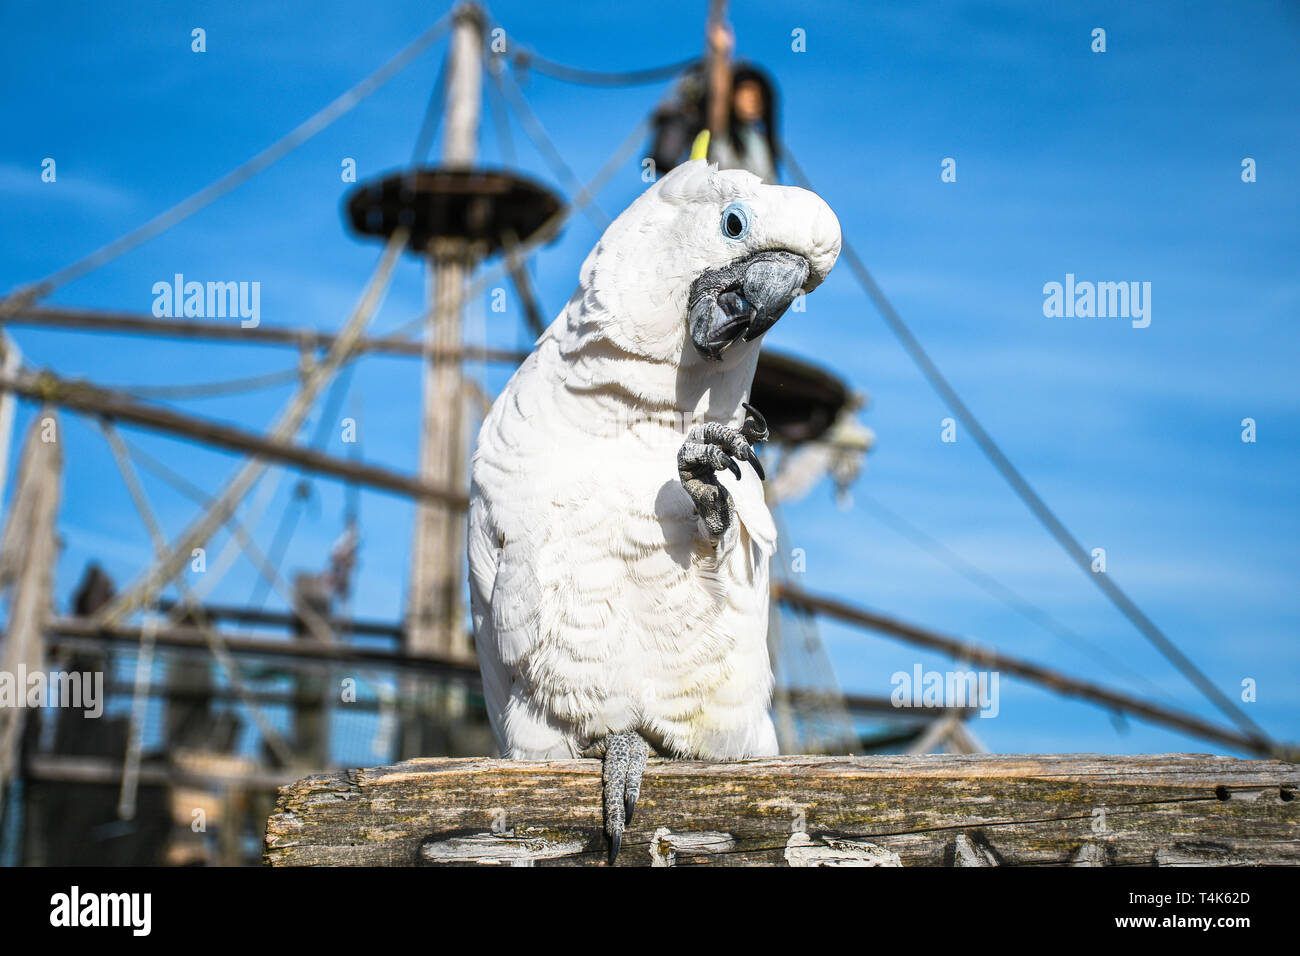 White yellow crested Cockatoo, Cacatua galerita, standing on an old wooden pirate boat Stock Photo